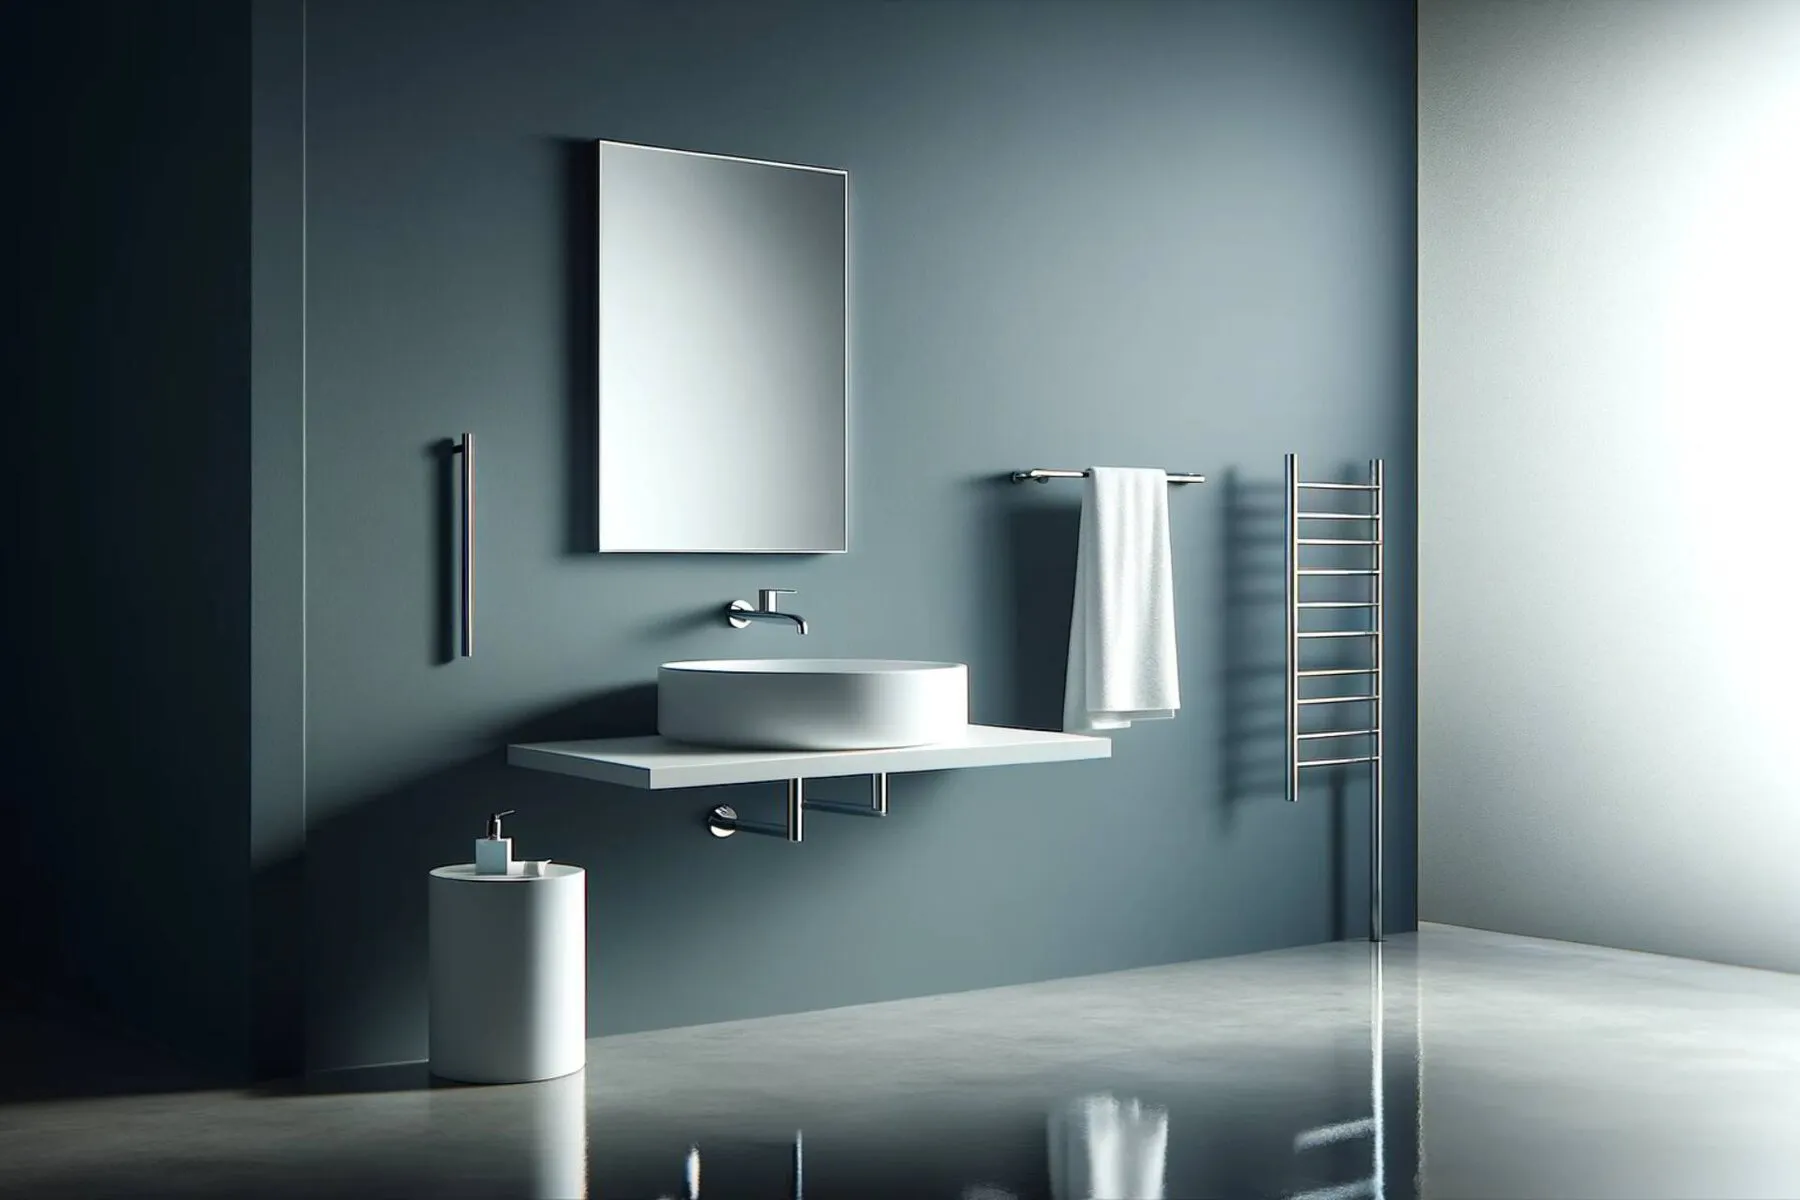 Minimalist modern bathroom interior focusing on spaciousness and cool tones complementing the sleek chrome fixtures